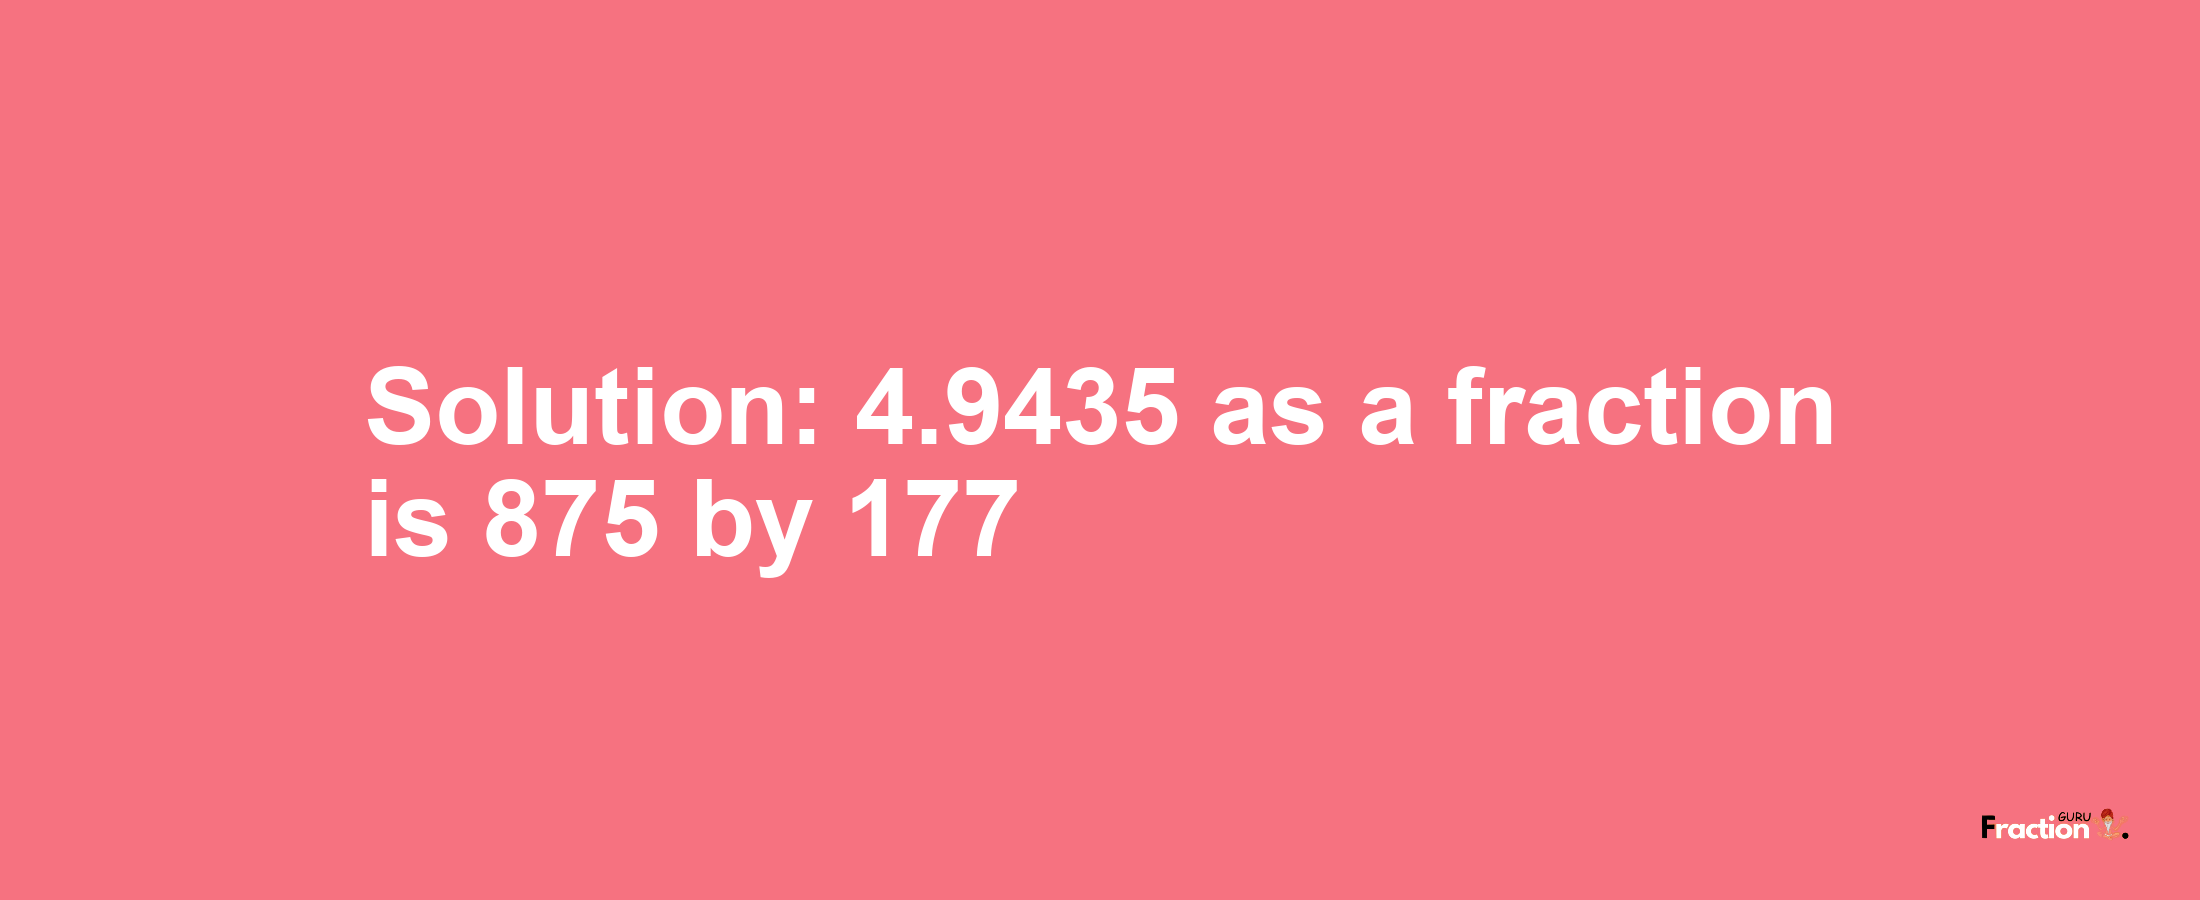 Solution:4.9435 as a fraction is 875/177